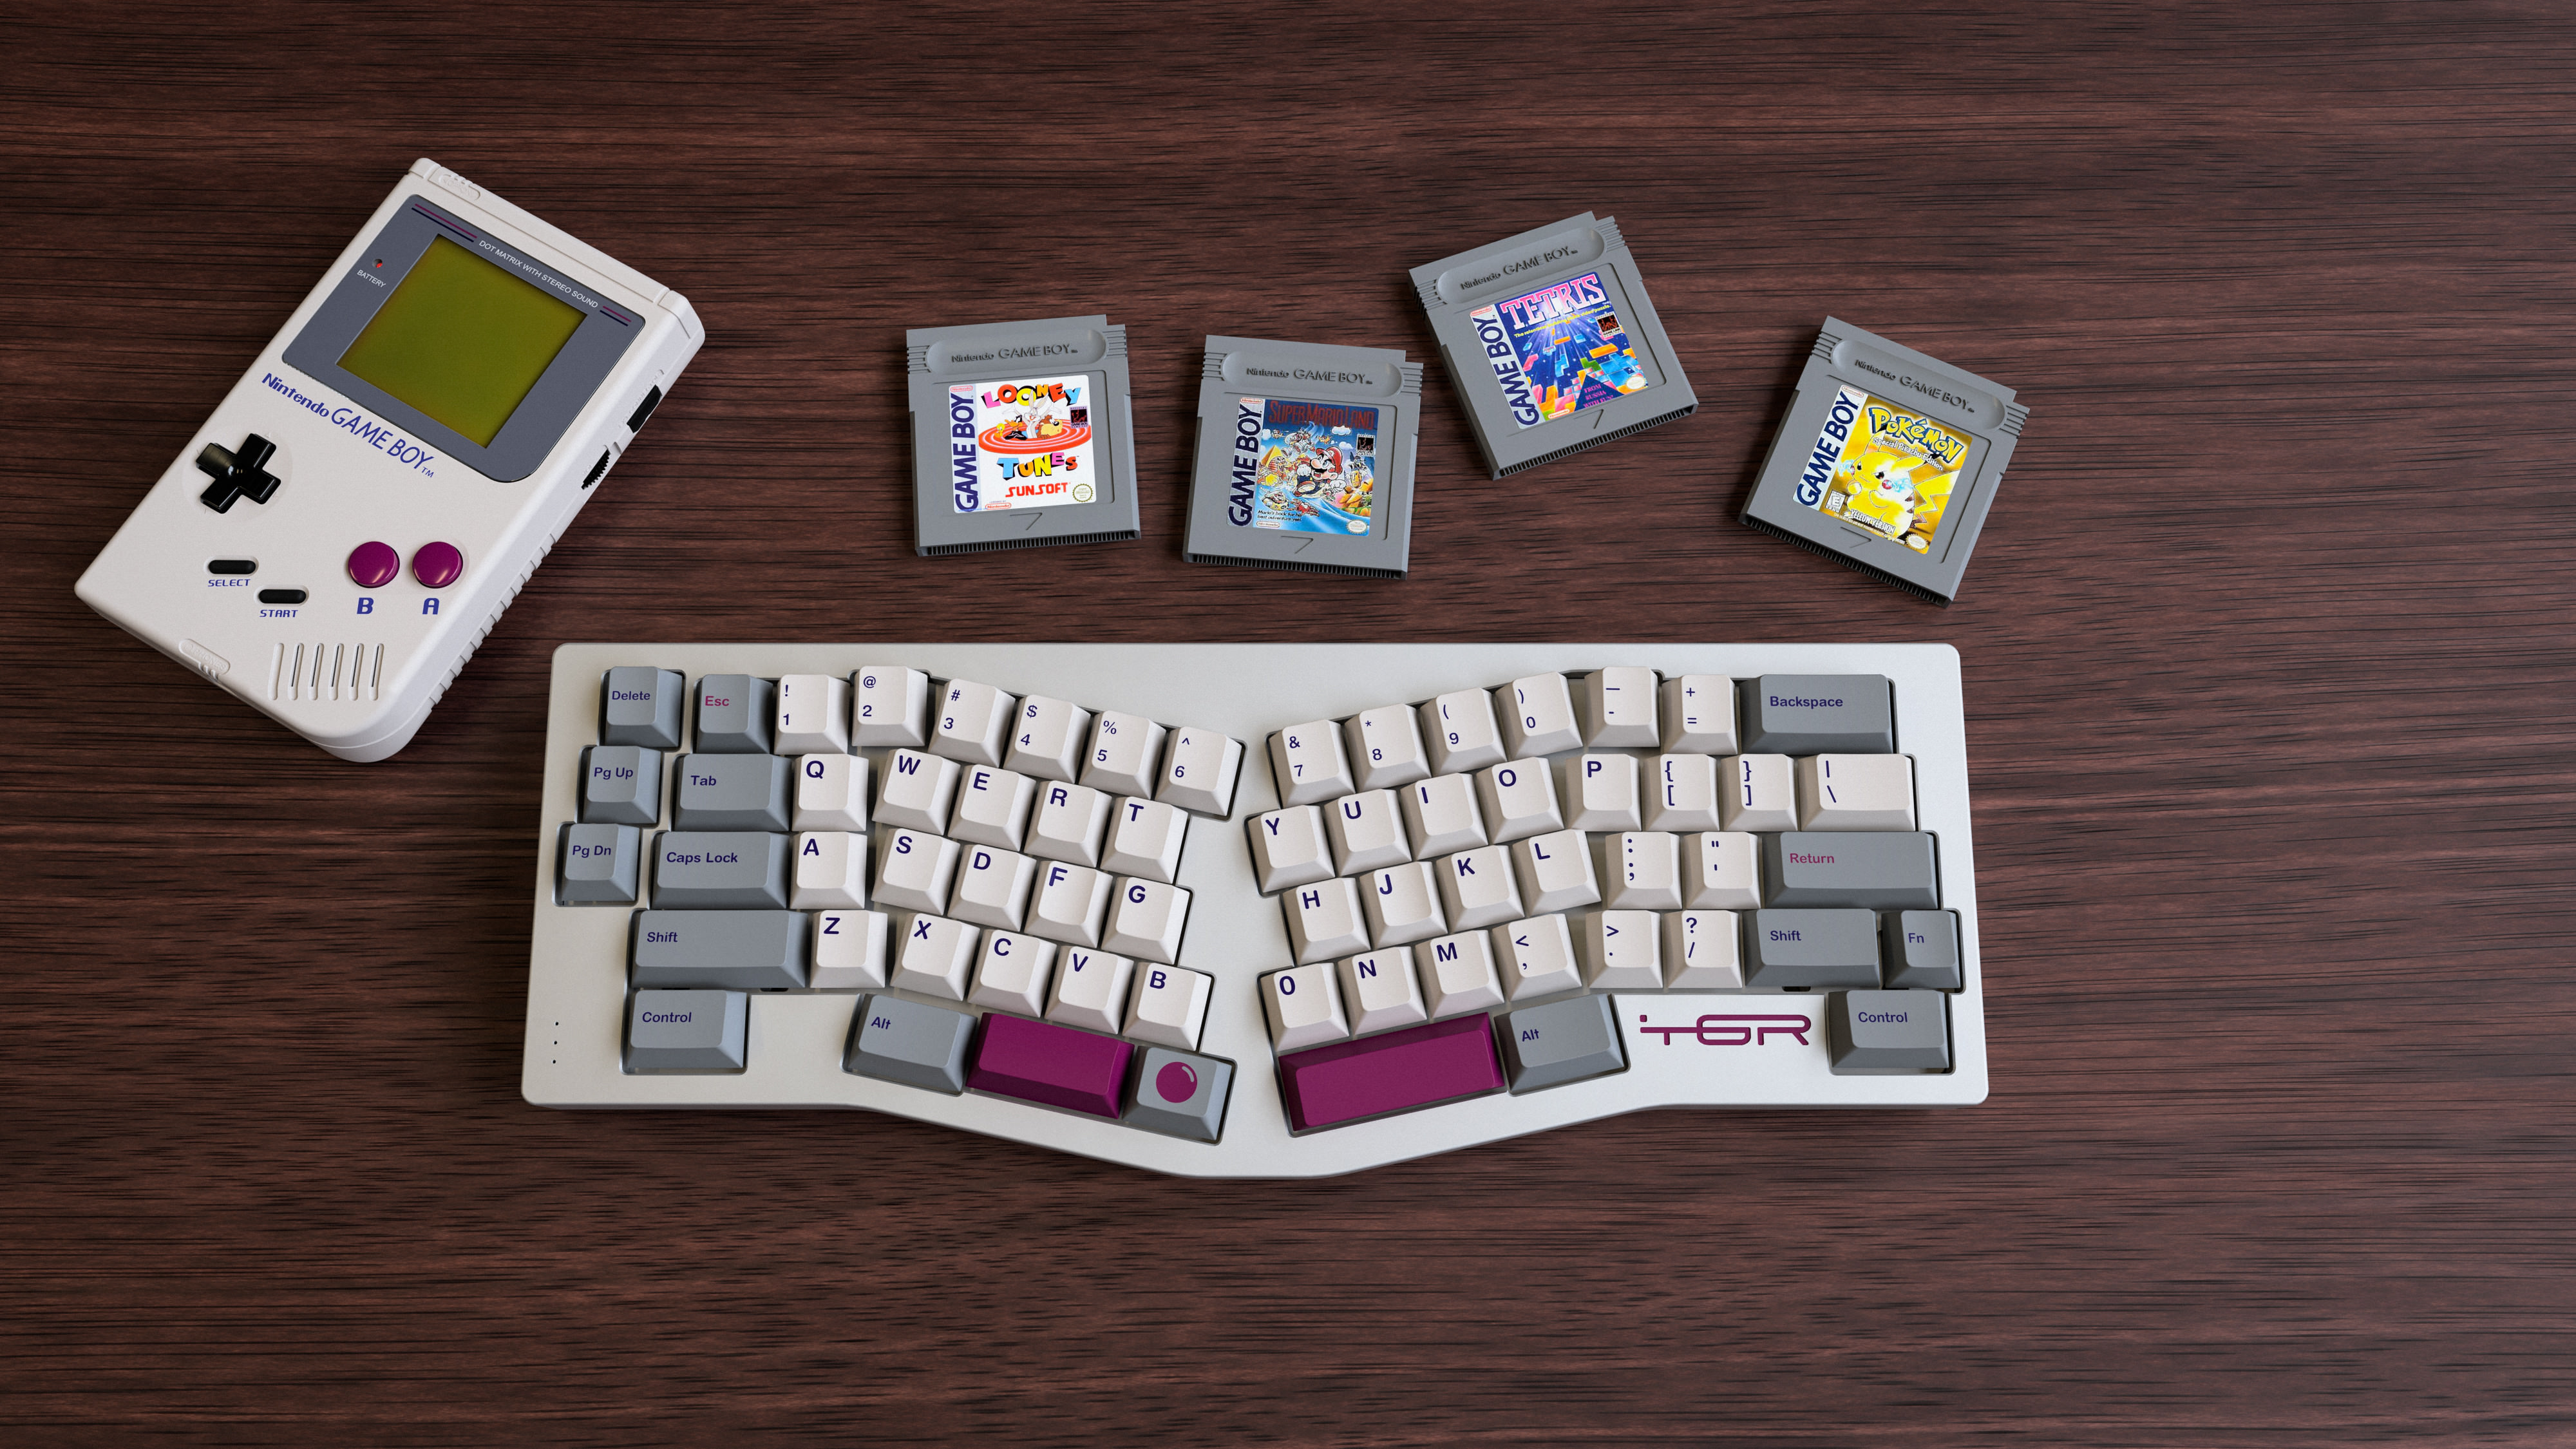 GB] GMK DMG - A Gameboy inspired keyset - Group buys and pre